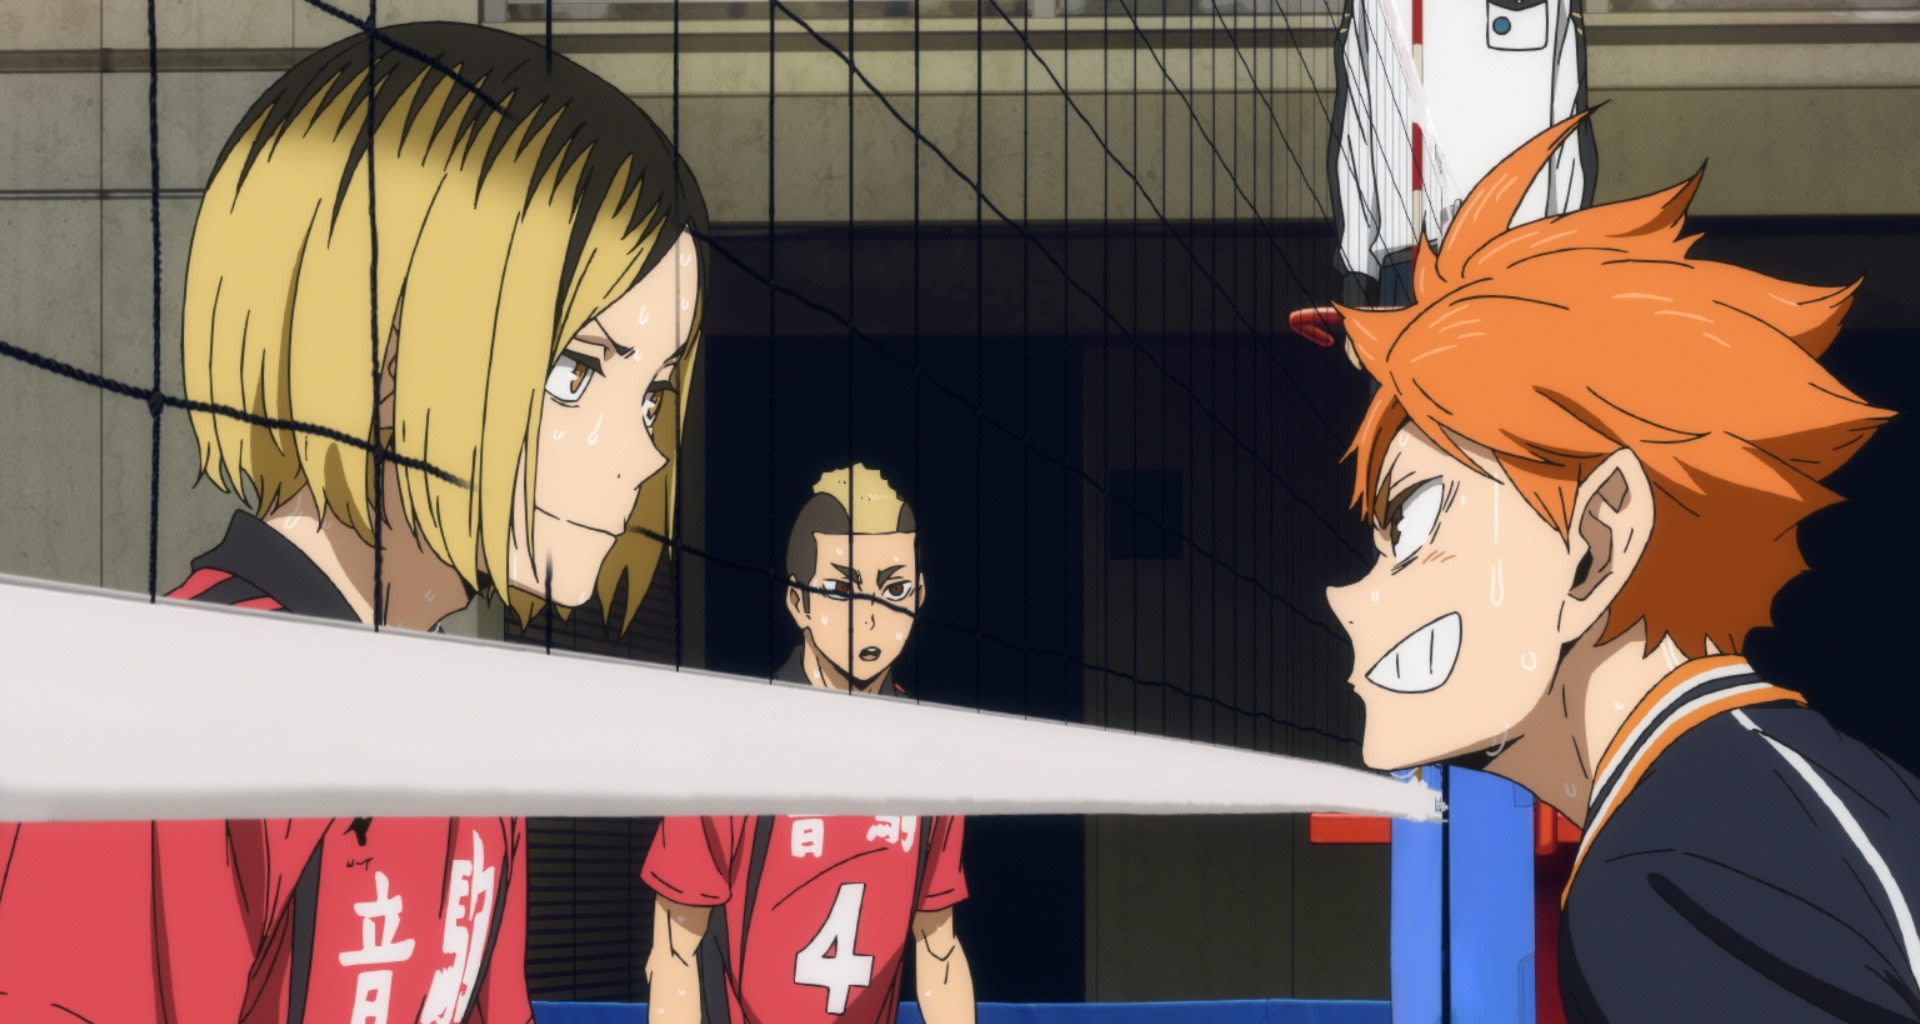 ‘Haikyu!! The Dumpster Battle’ Finds $800K In Previews In What’s Another Weak Weekend At Summer B.O. – ...